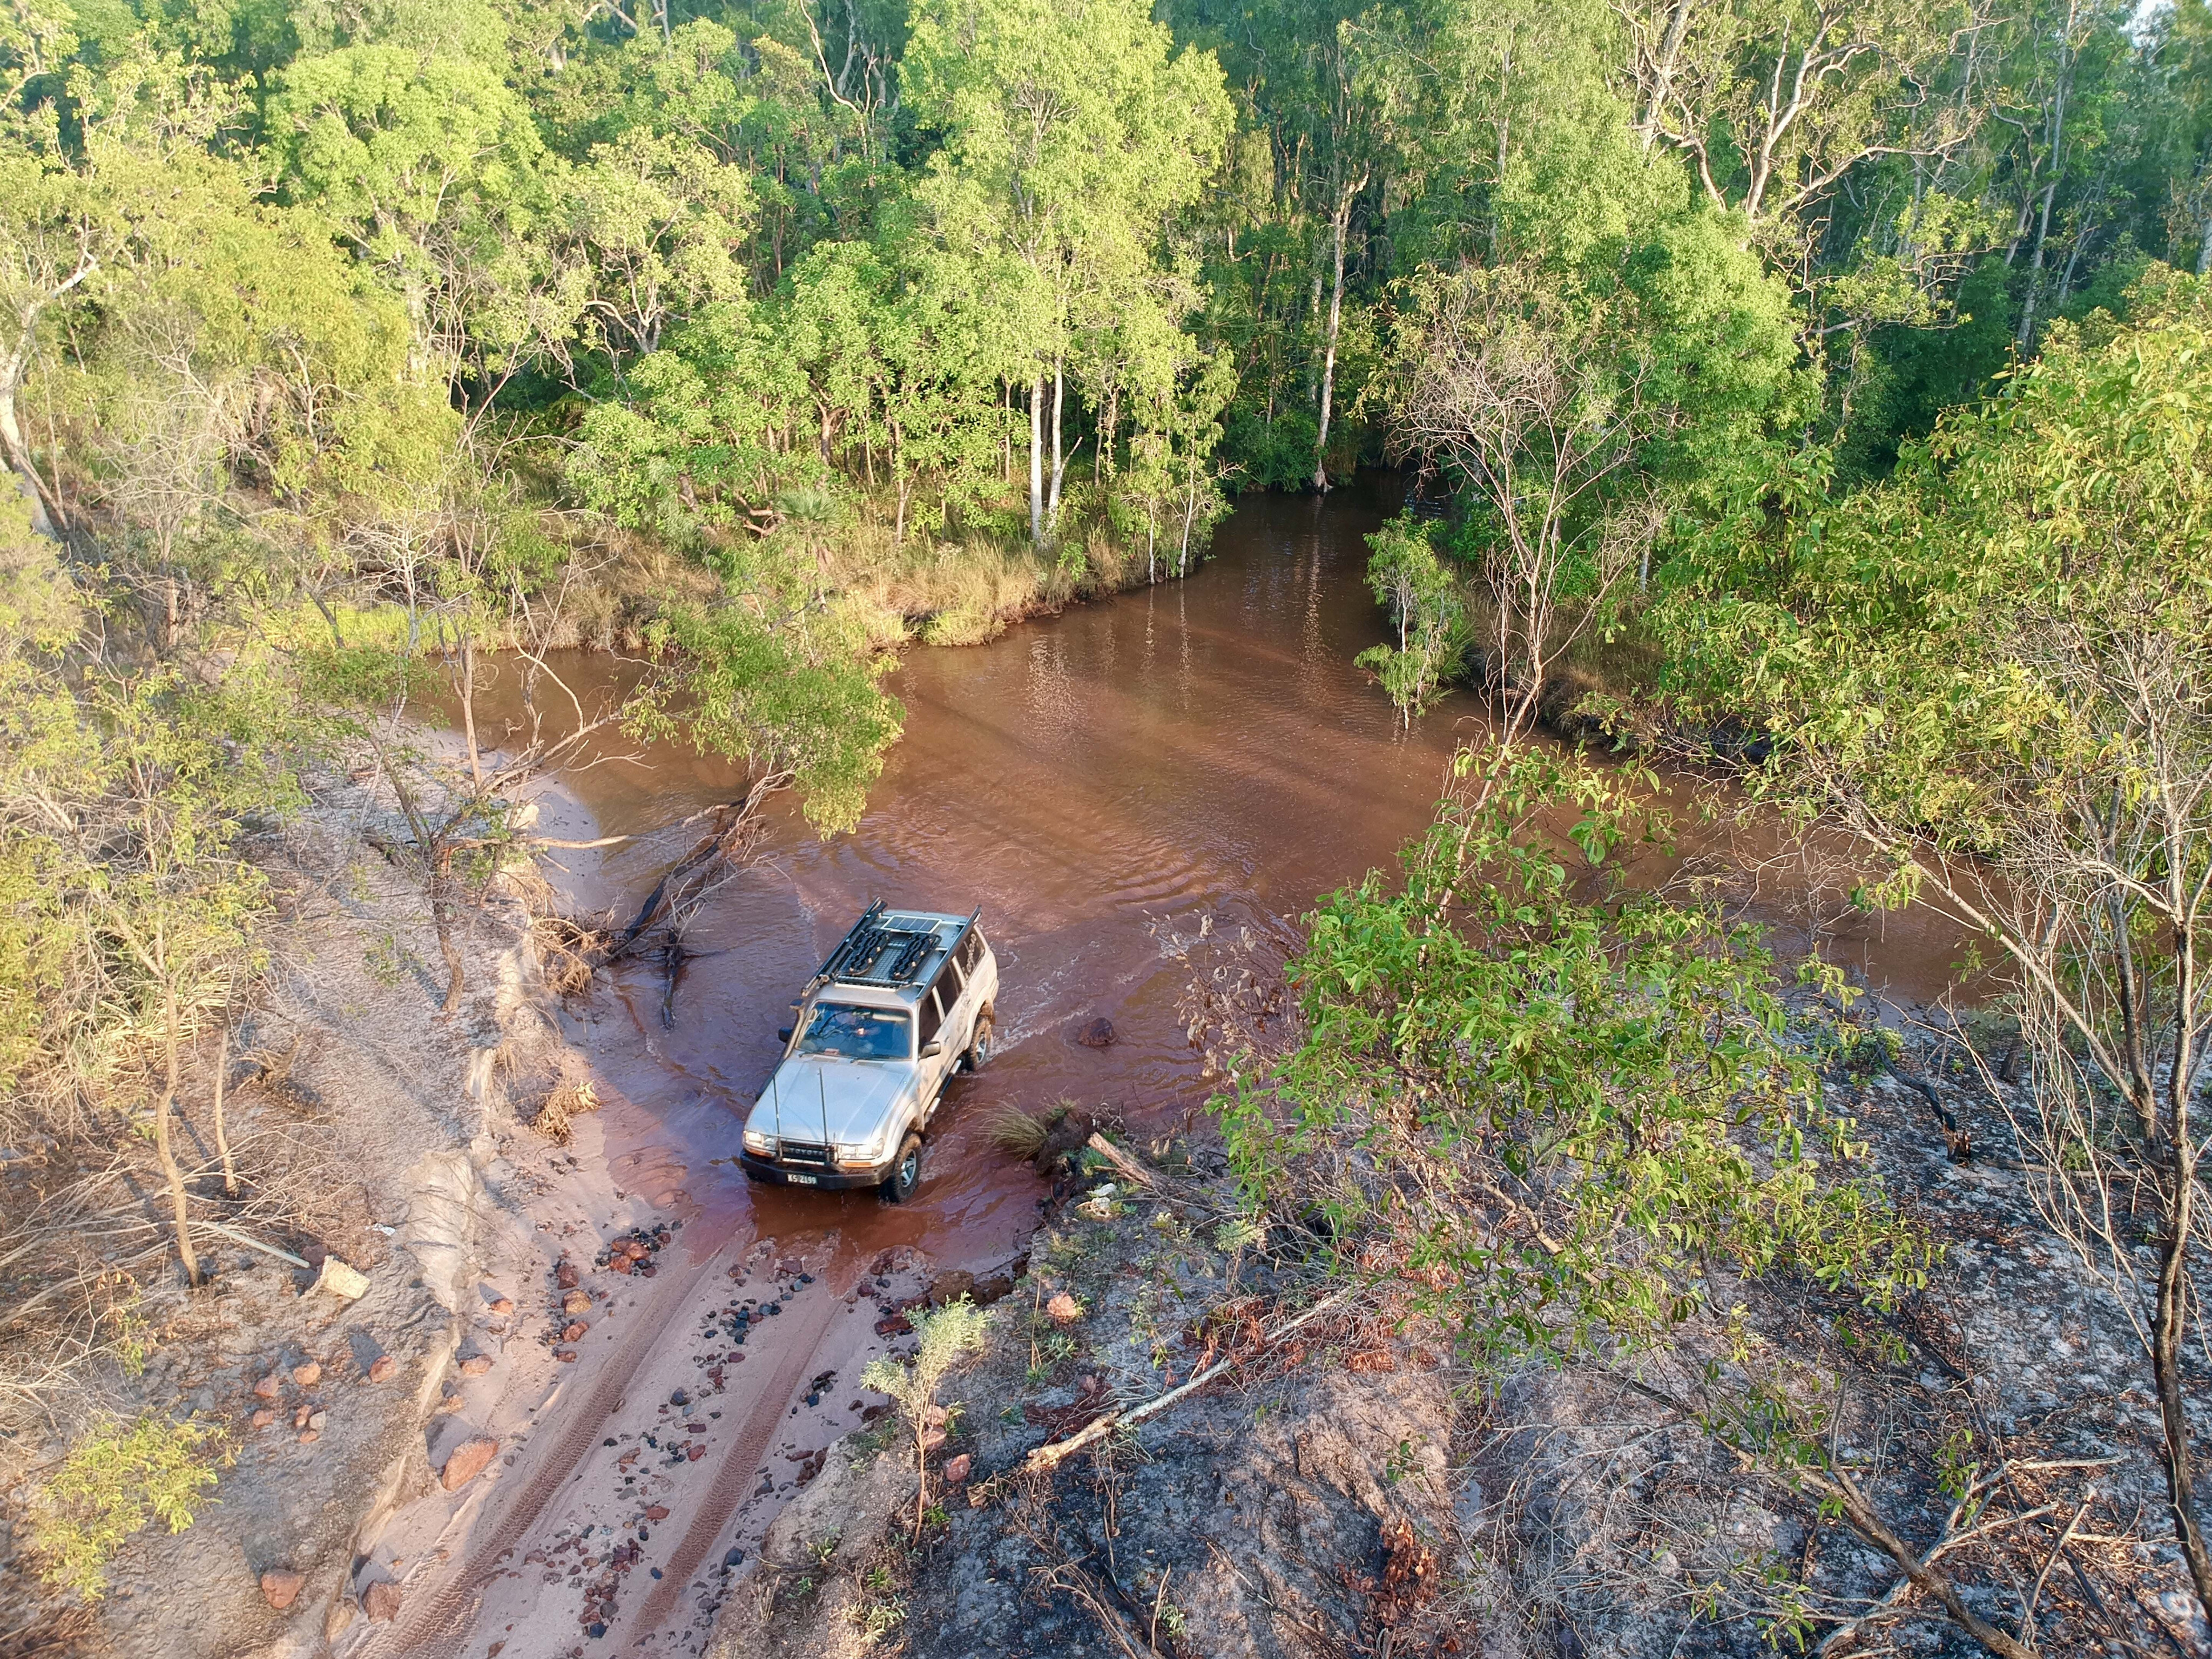 c9aa1cd4/crossing the renoylds river litchfield national park jpg